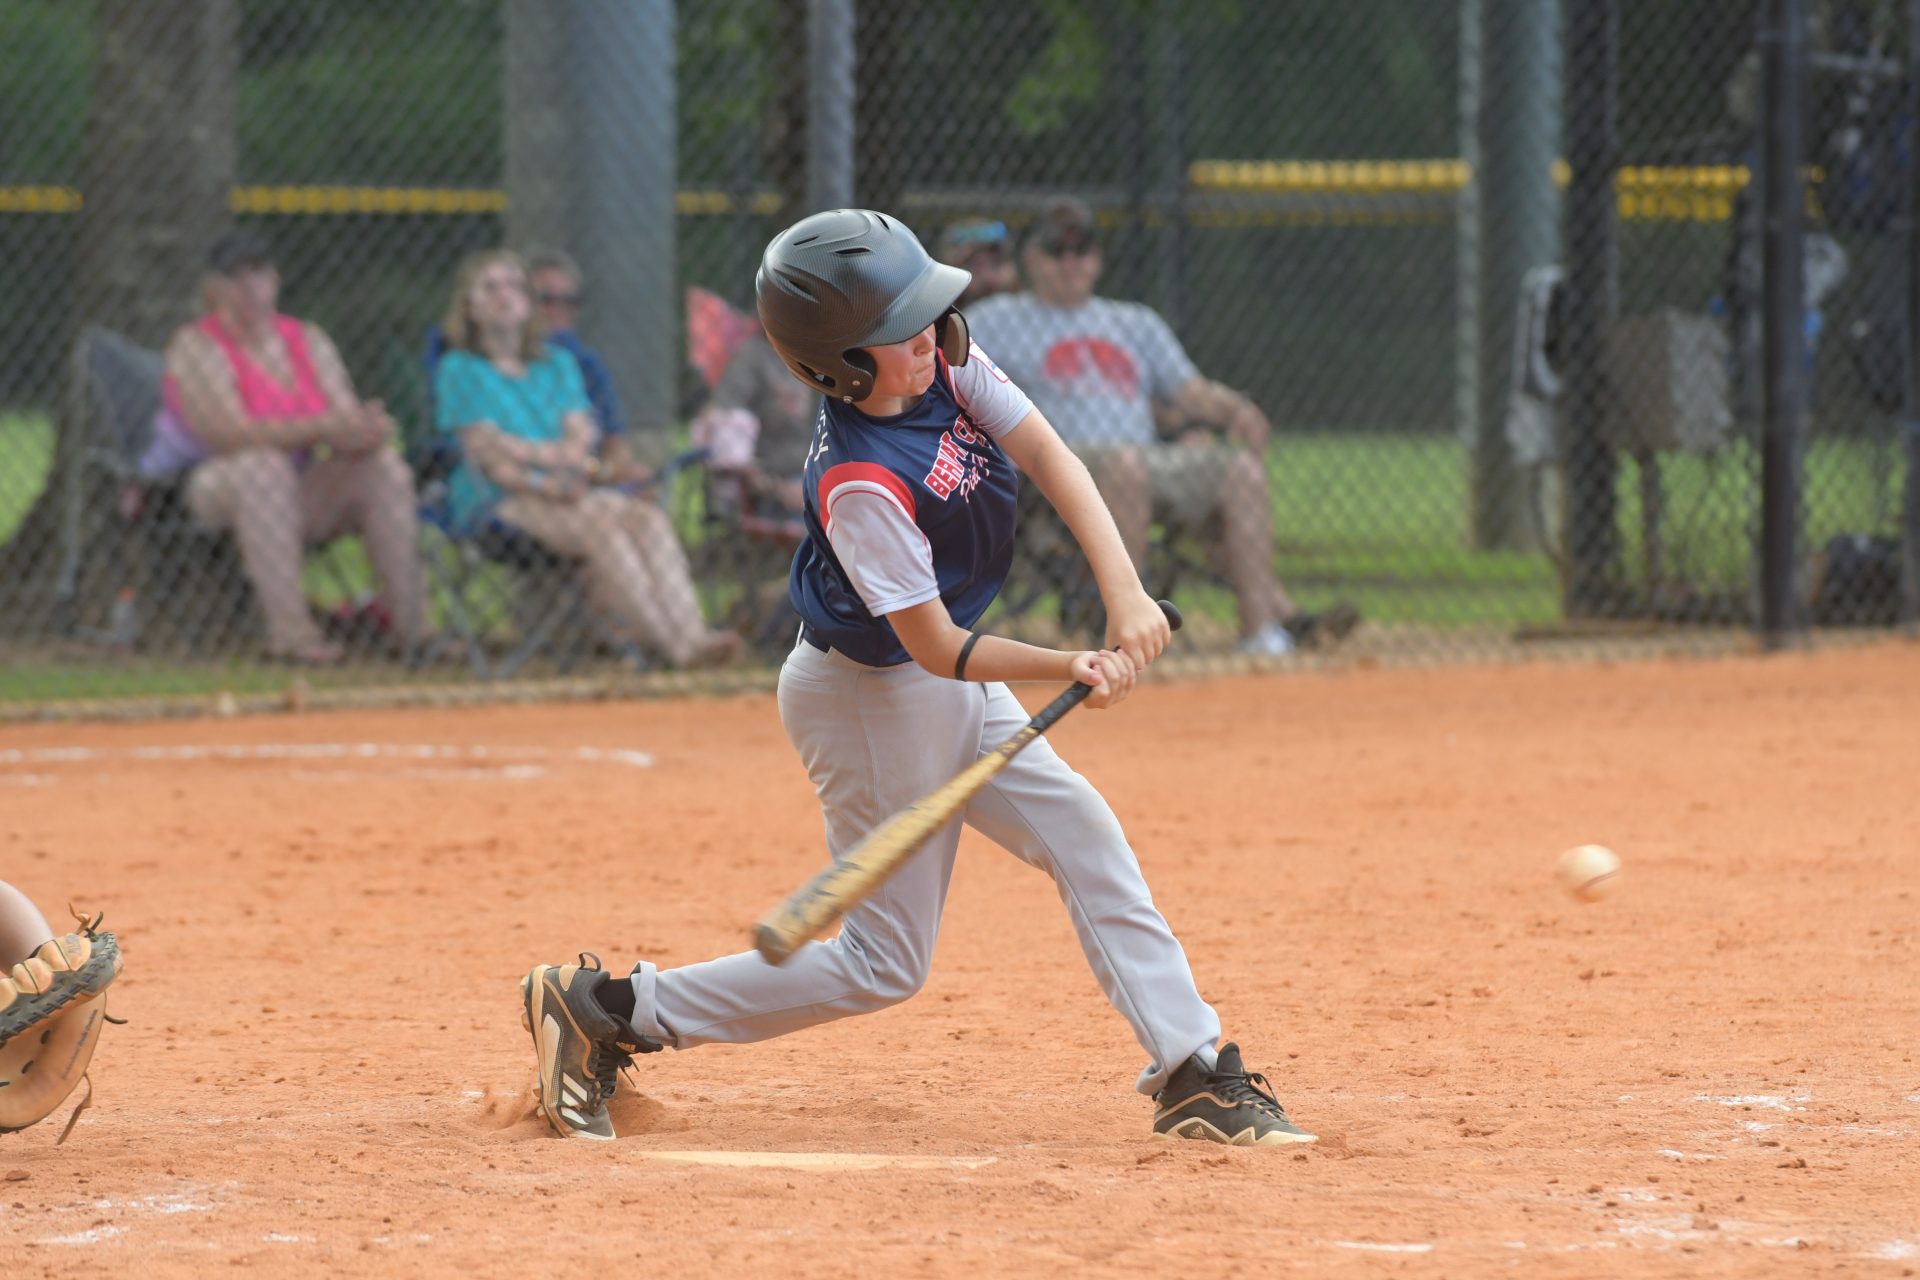 Beaufort County 13-and-under all-star Rylan McGarvey goes down to get a pitch during an 11-4 win over Oconee County in the championship game of the Dixie Junior Boys state tournament. The team finished 3-1 and claimed the state title. Justin Jarrett/LowcoSports.com